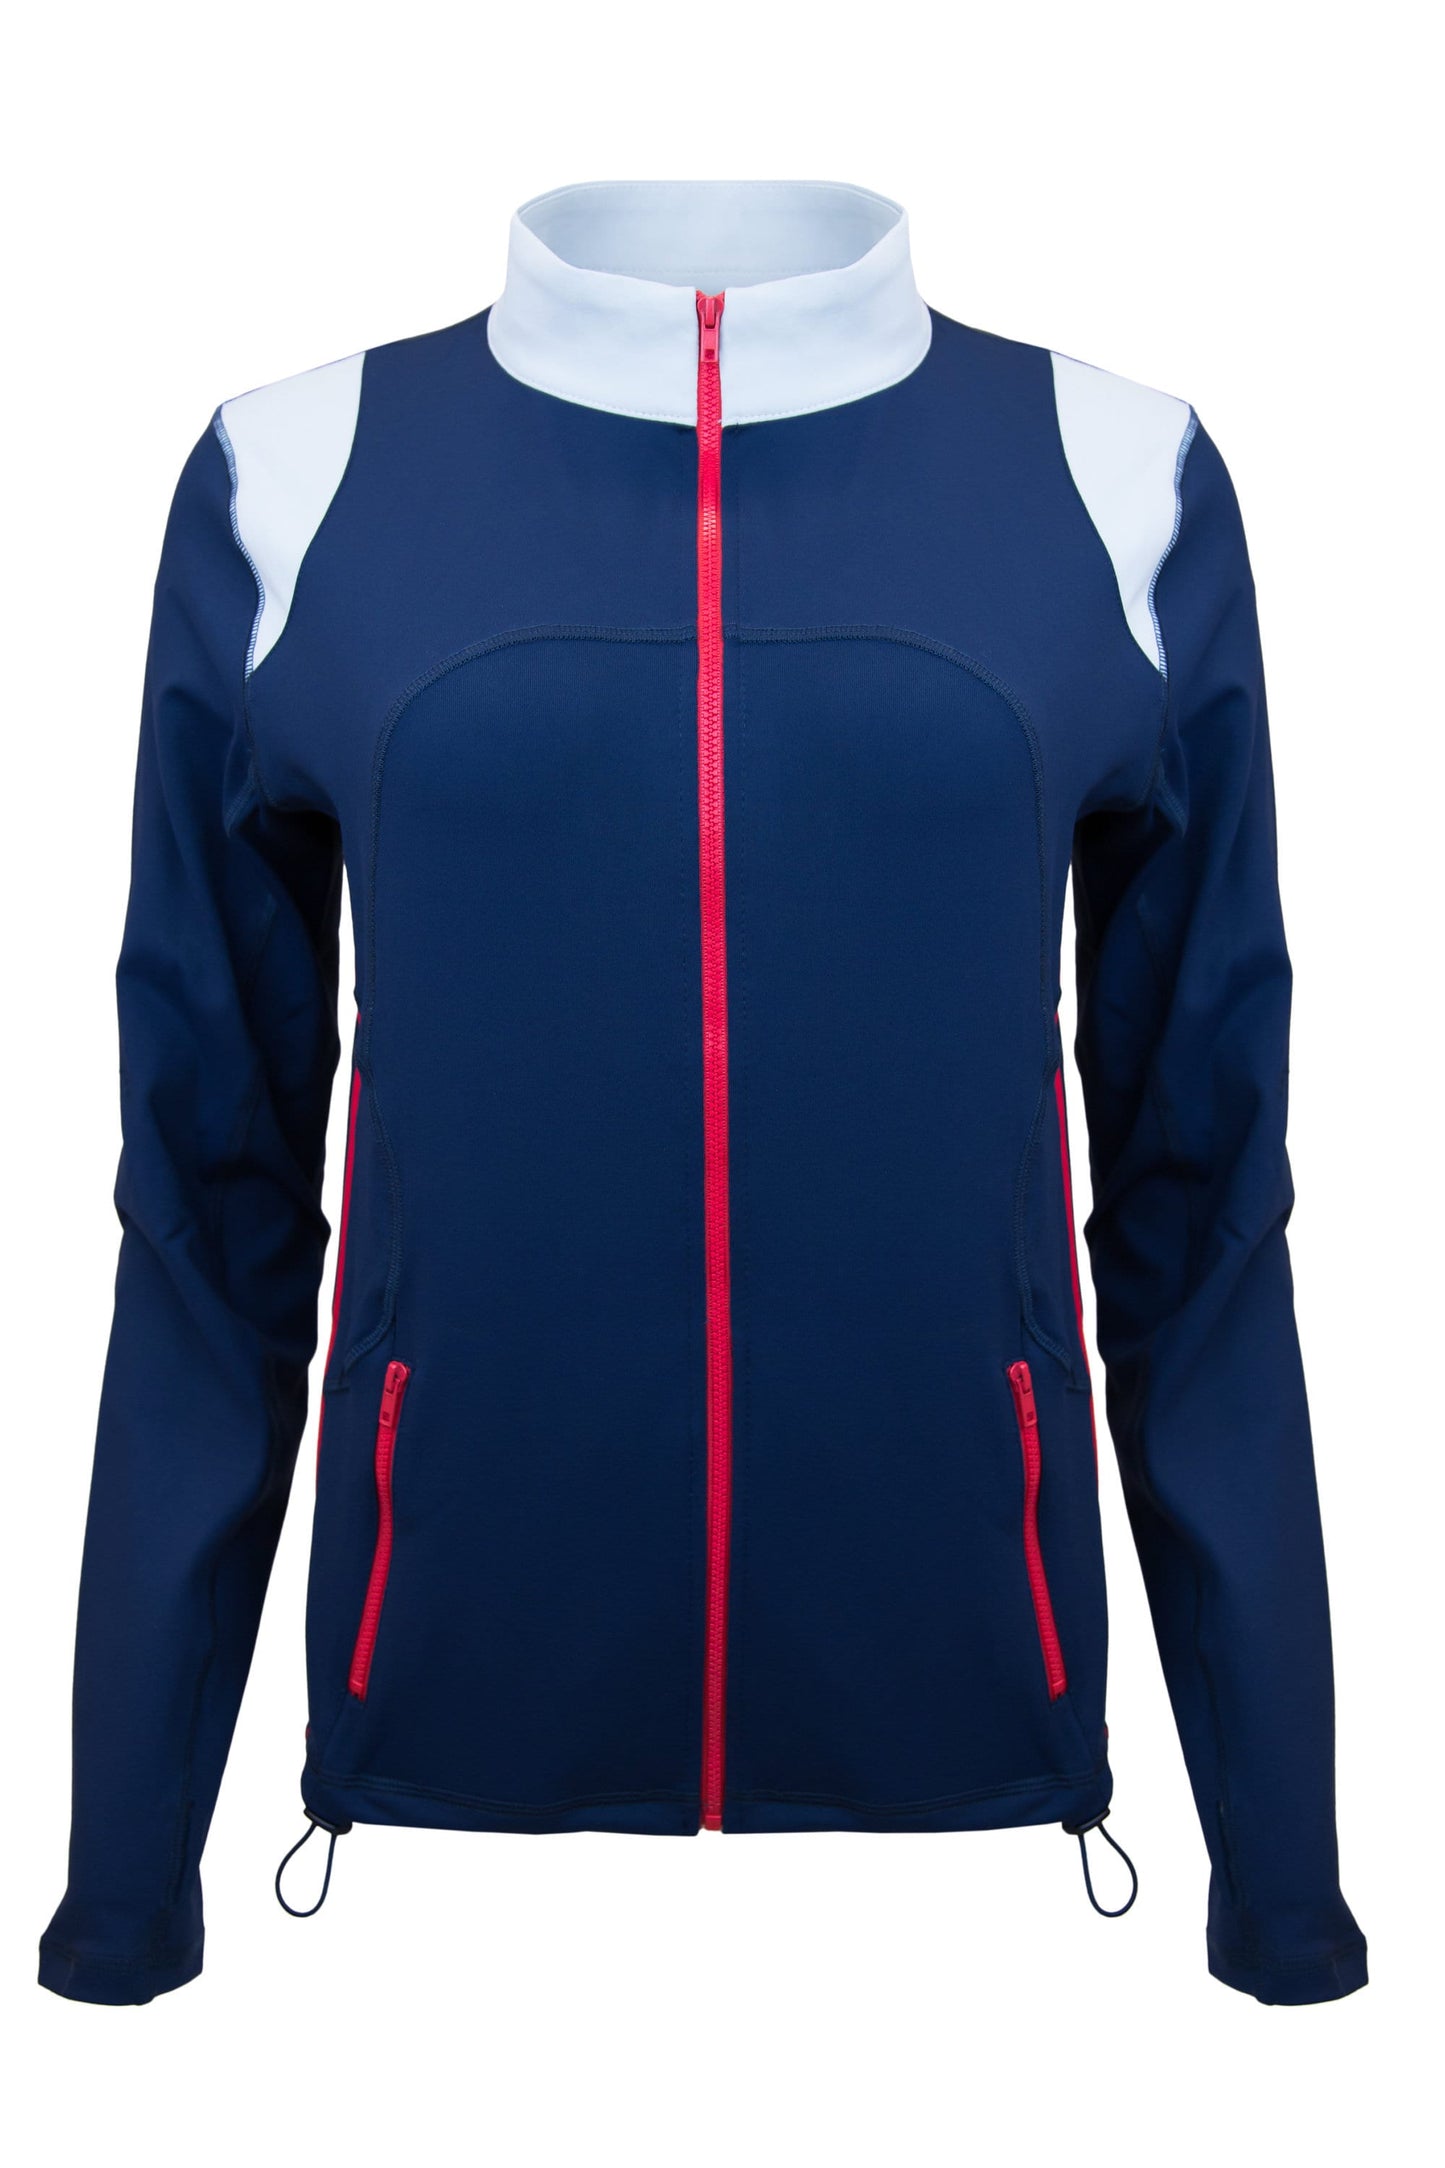 Red White and Blue Women's Yoga Track Jacket